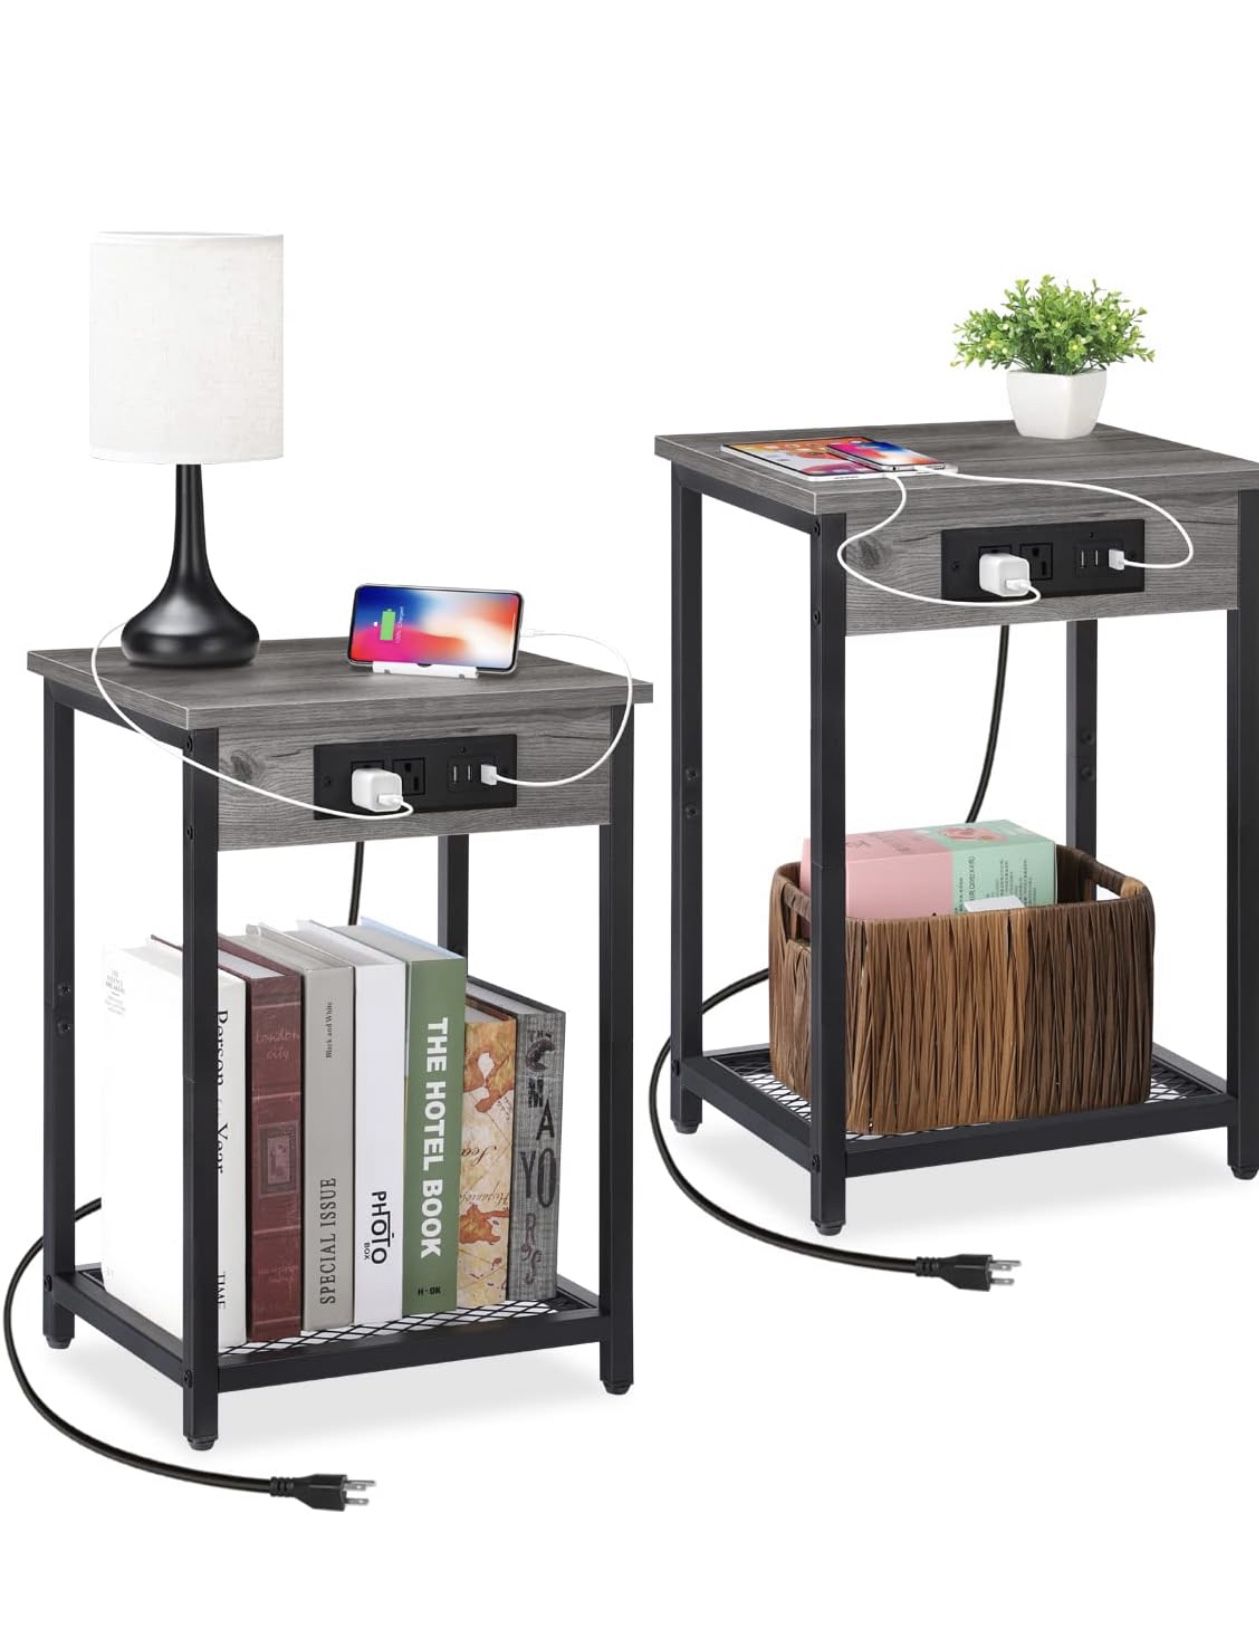 Nightstands 2 with Charging Station, 2 Tier Bedside Table with USB Ports and Outlets, Narrow End Table with Storage Shelf, Side Tables for Room,livin